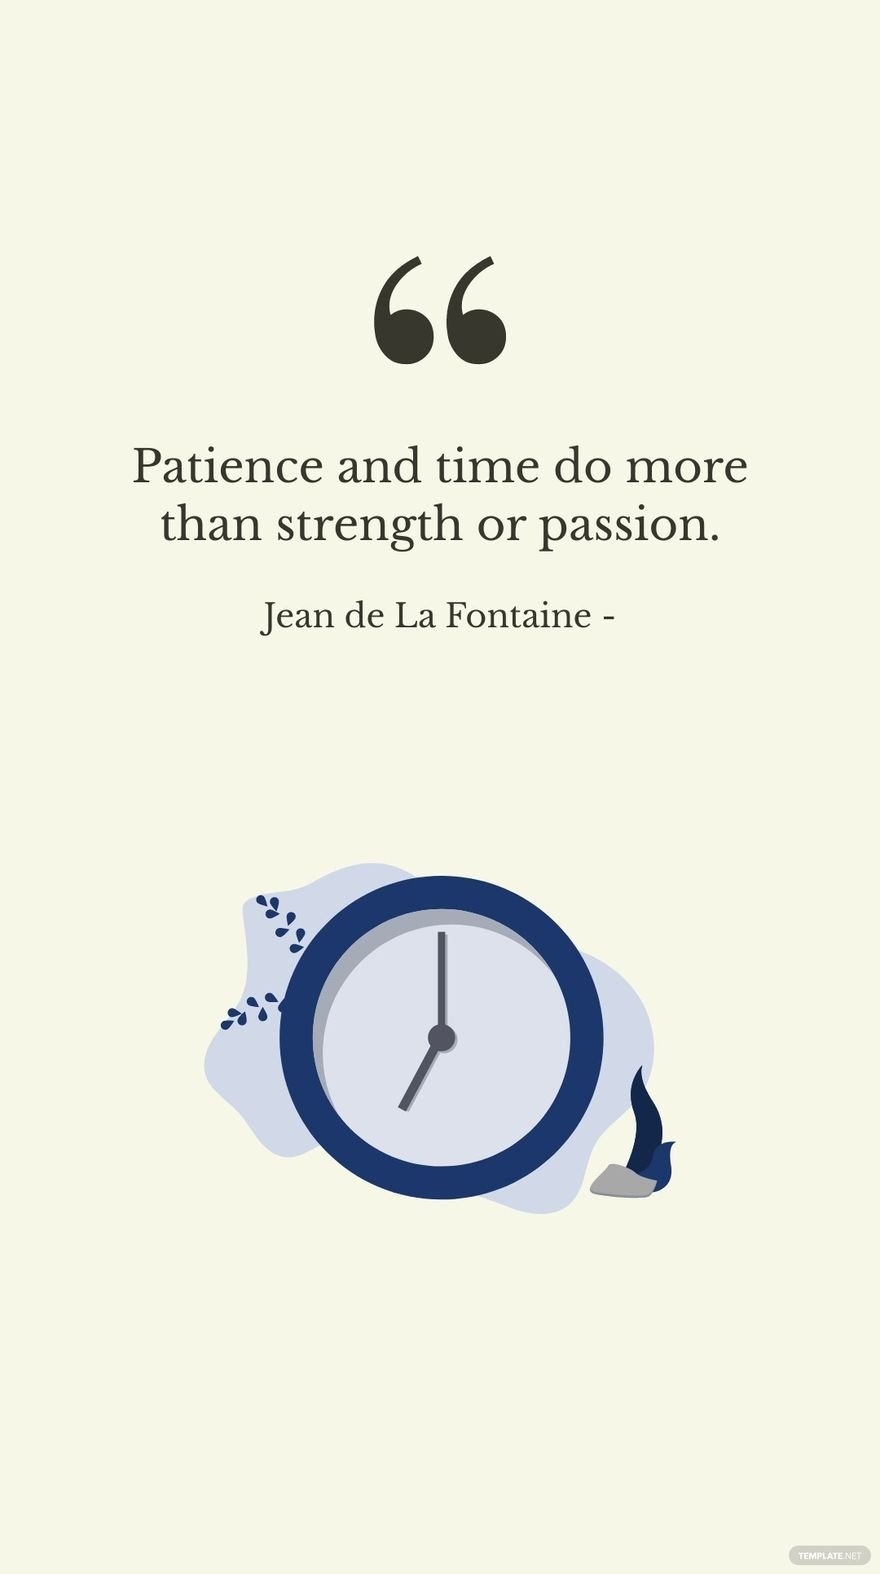 Free Jean de La Fontaine - Patience and time do more than strength or passion.